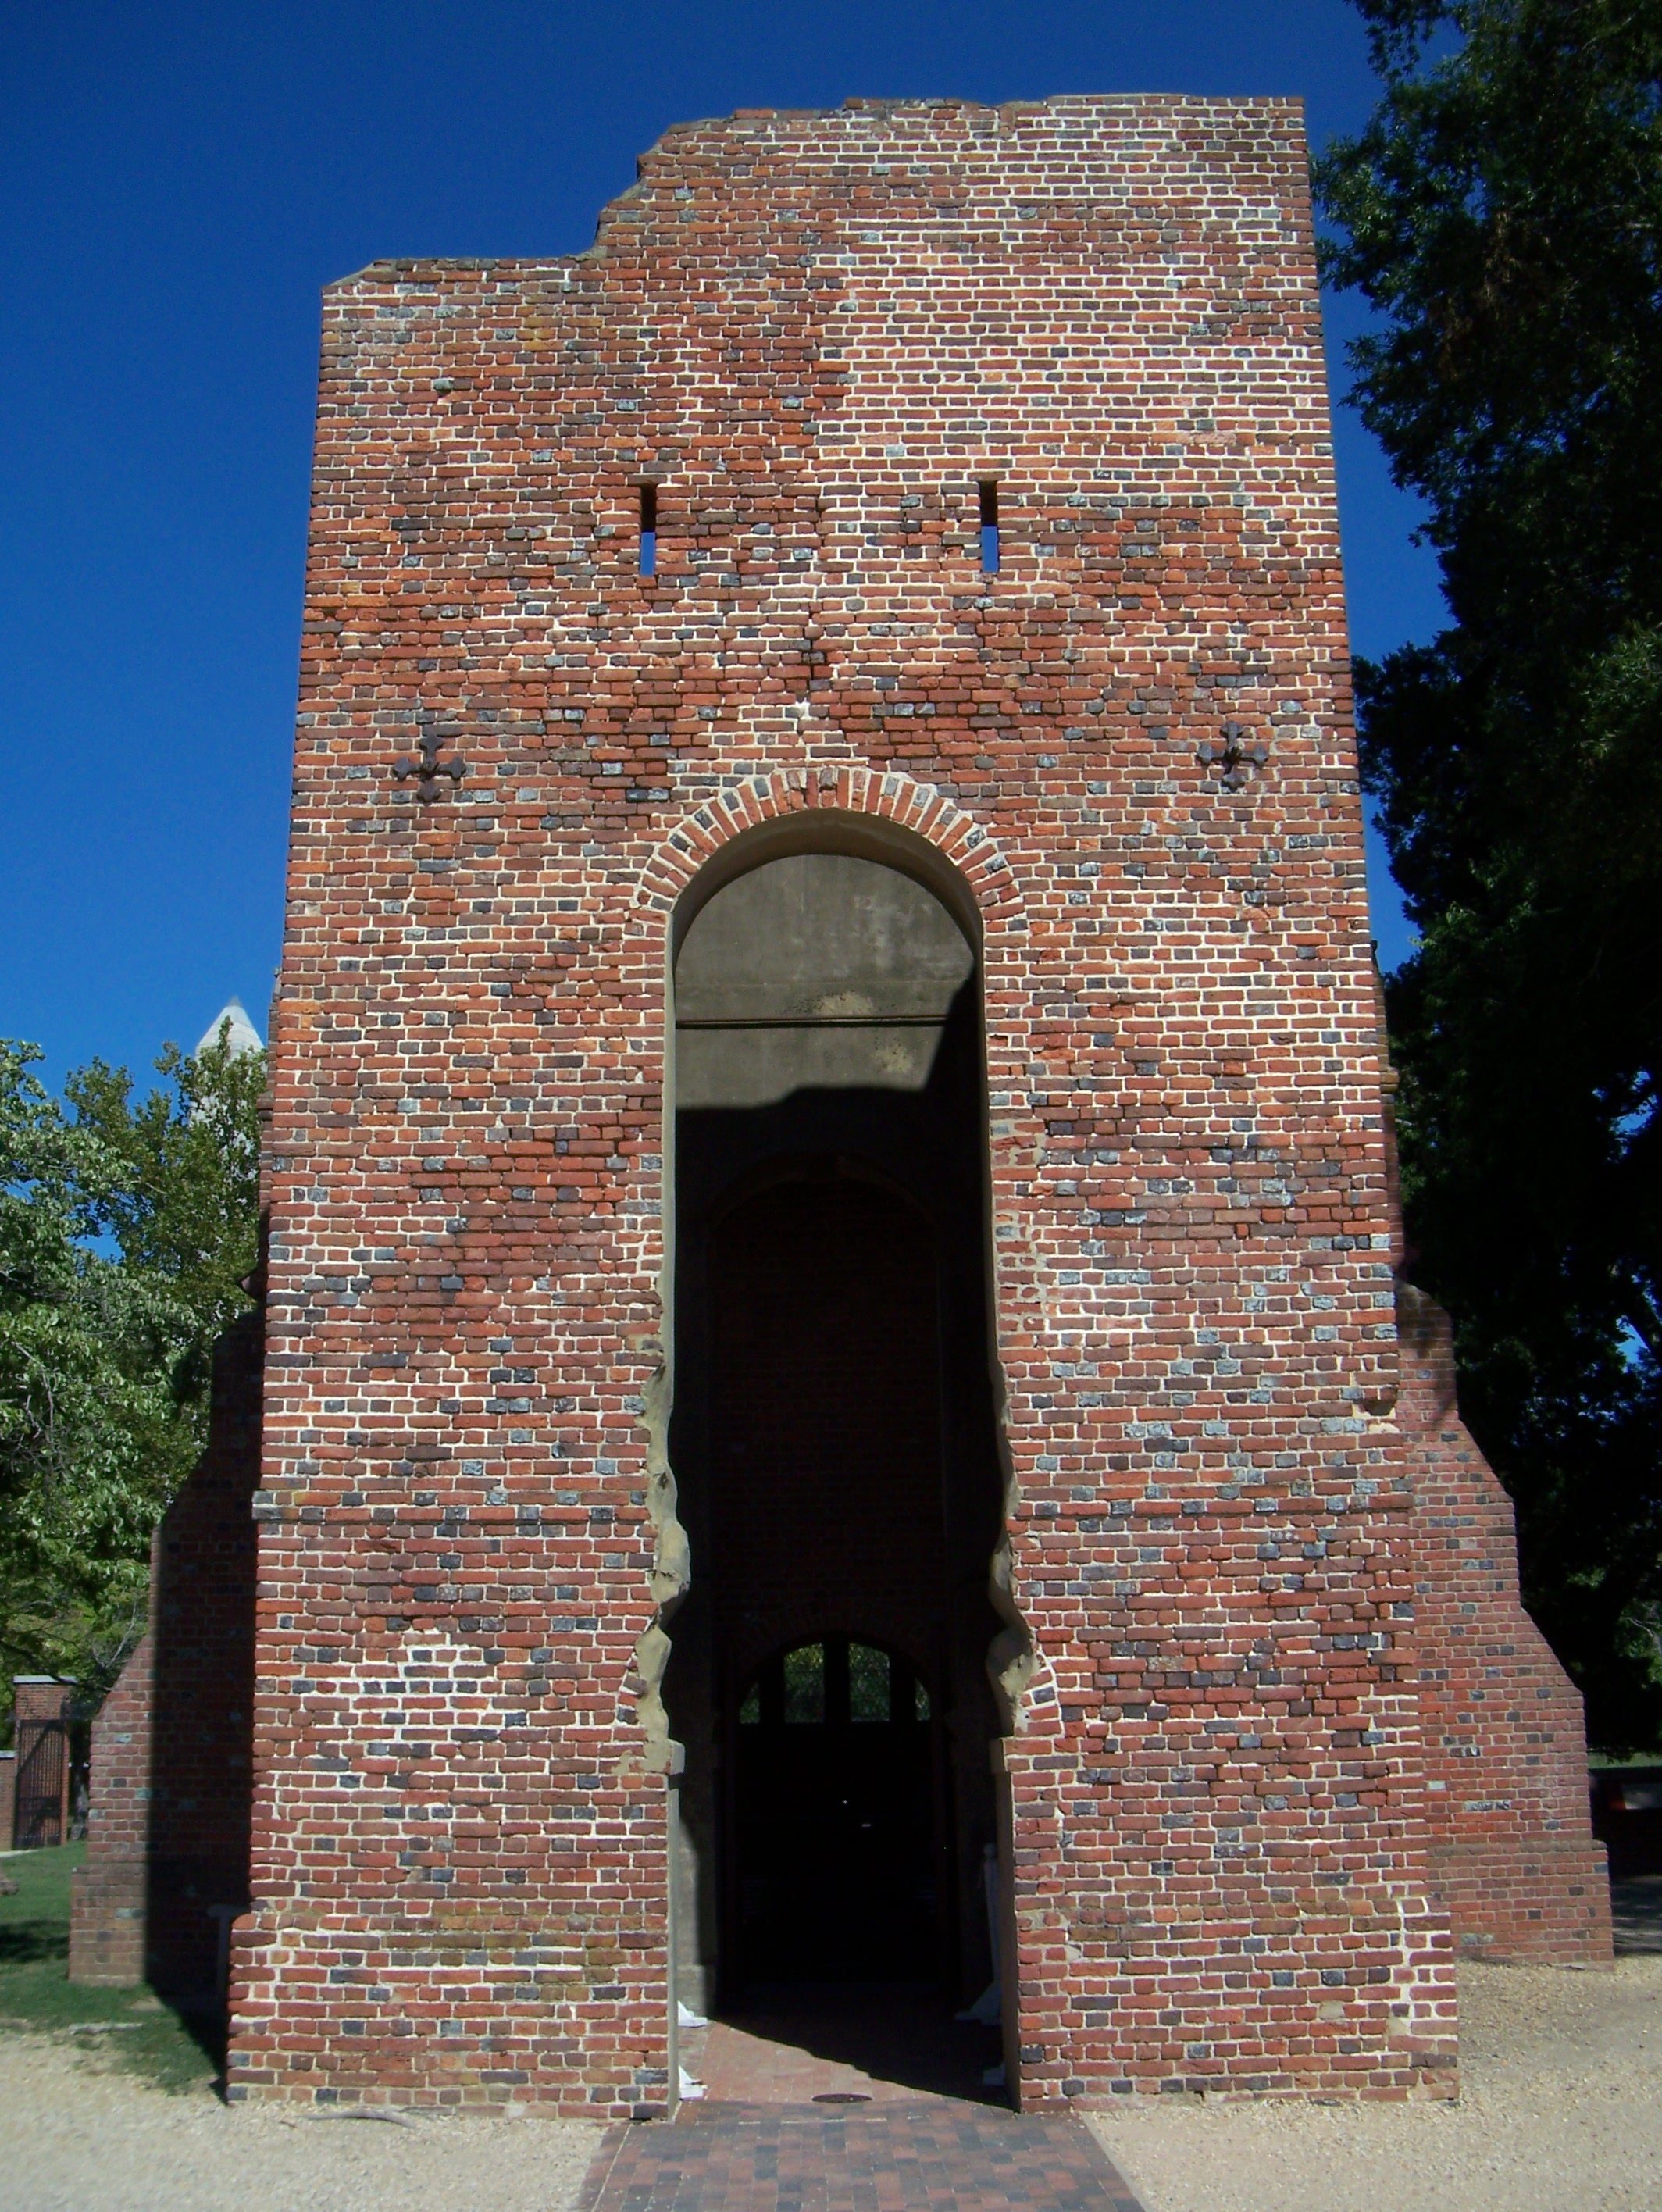 The History Blog » Blog Archive » 17th c. Jamestown church tower ...